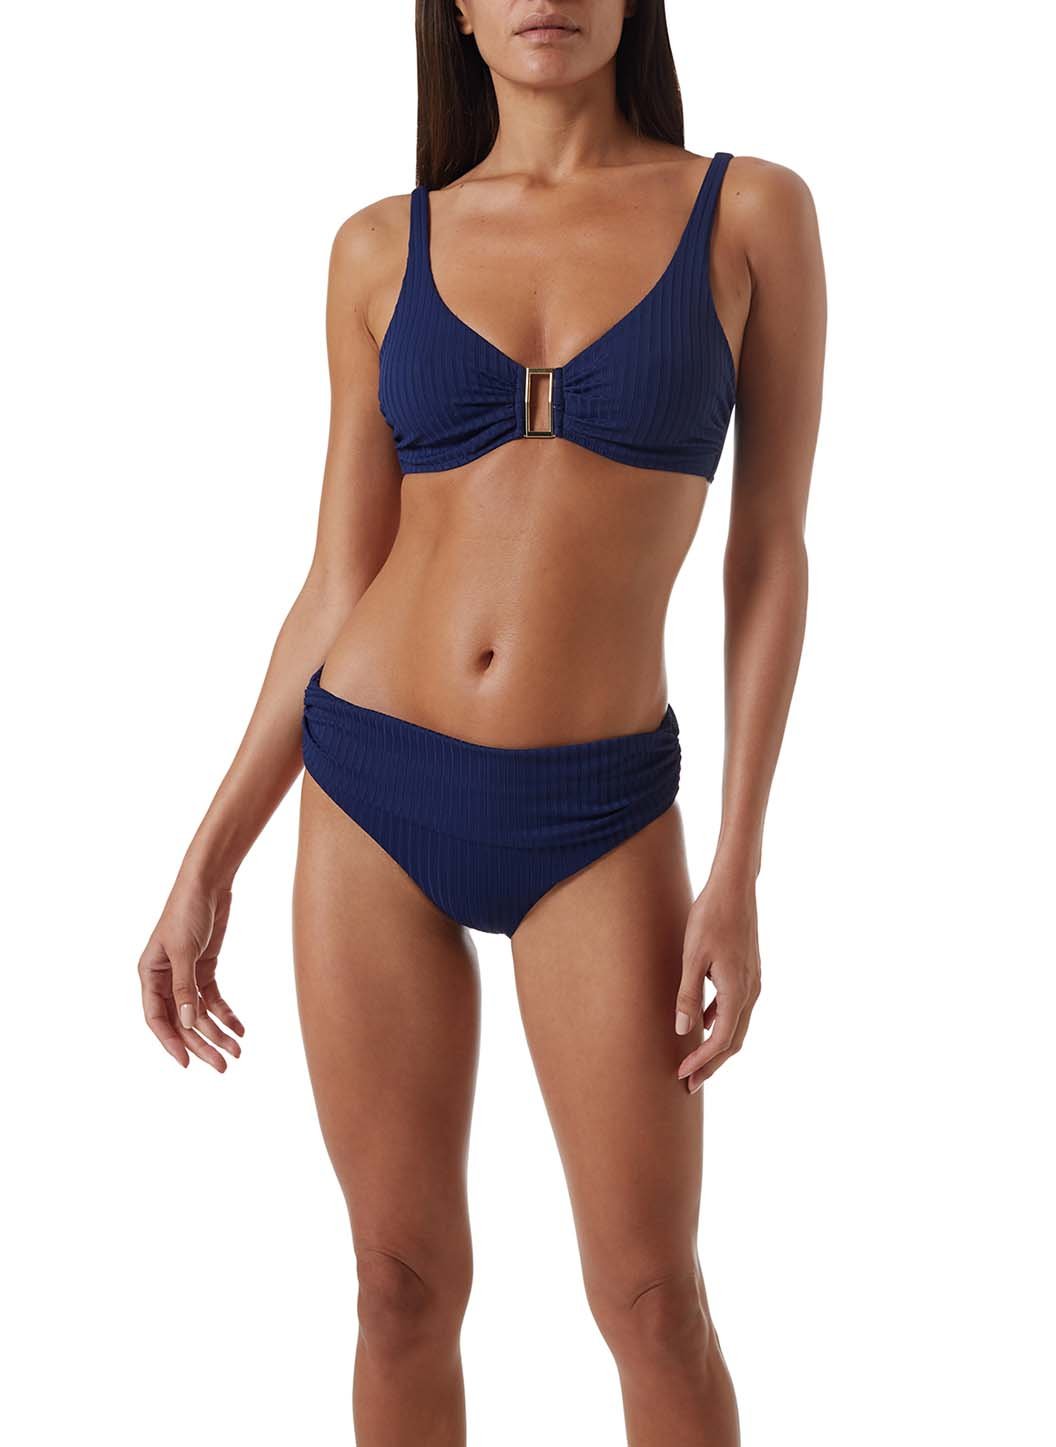 bel air navy ribbed supportive over the shoulder bikini model_P